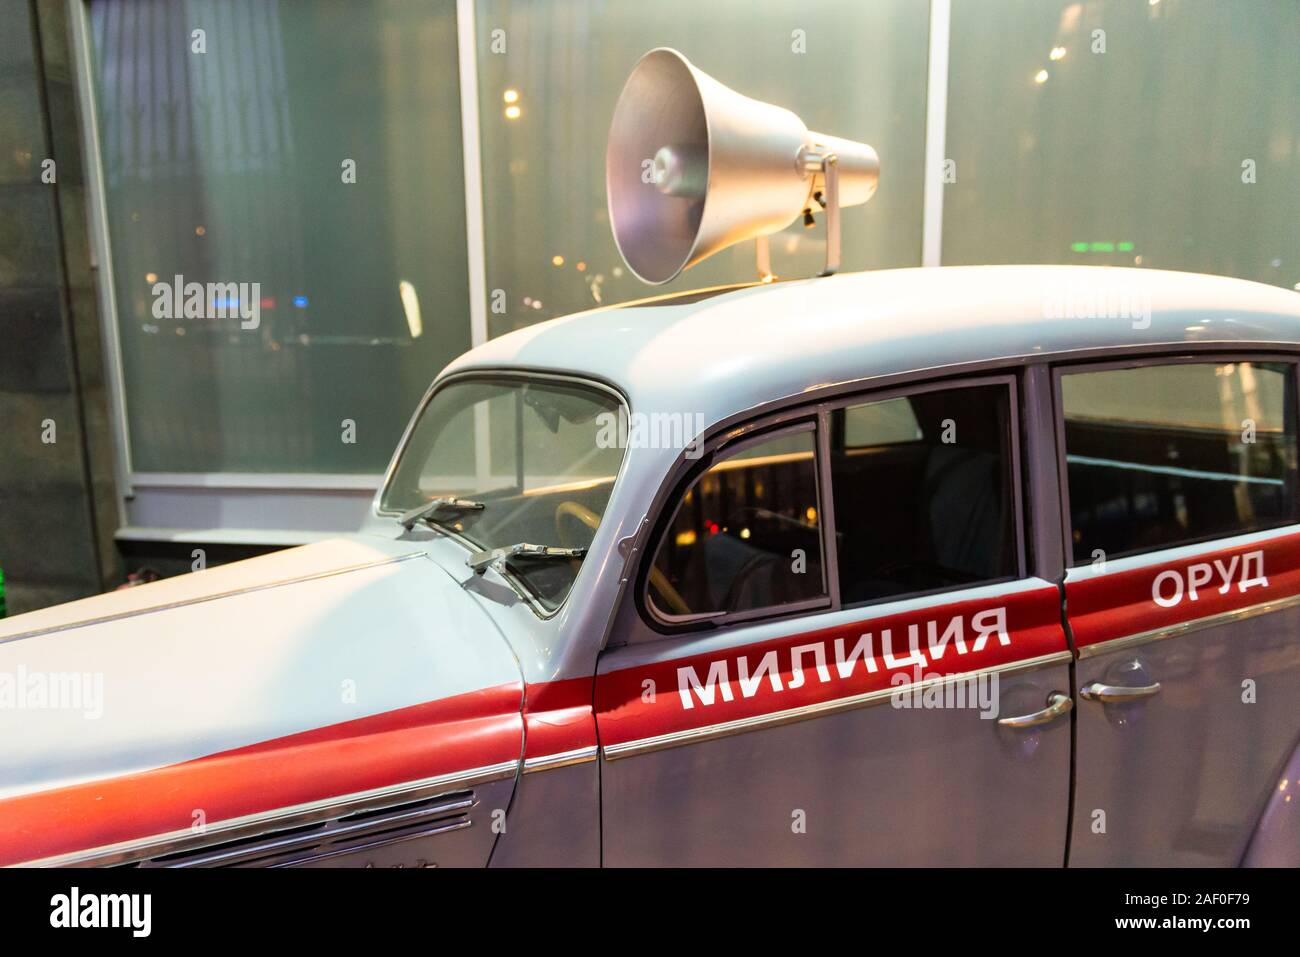 Retro cars. An old police car of the Soviet Union. Emergency services car. A huge loudspeaker on the roof. Stock Photo